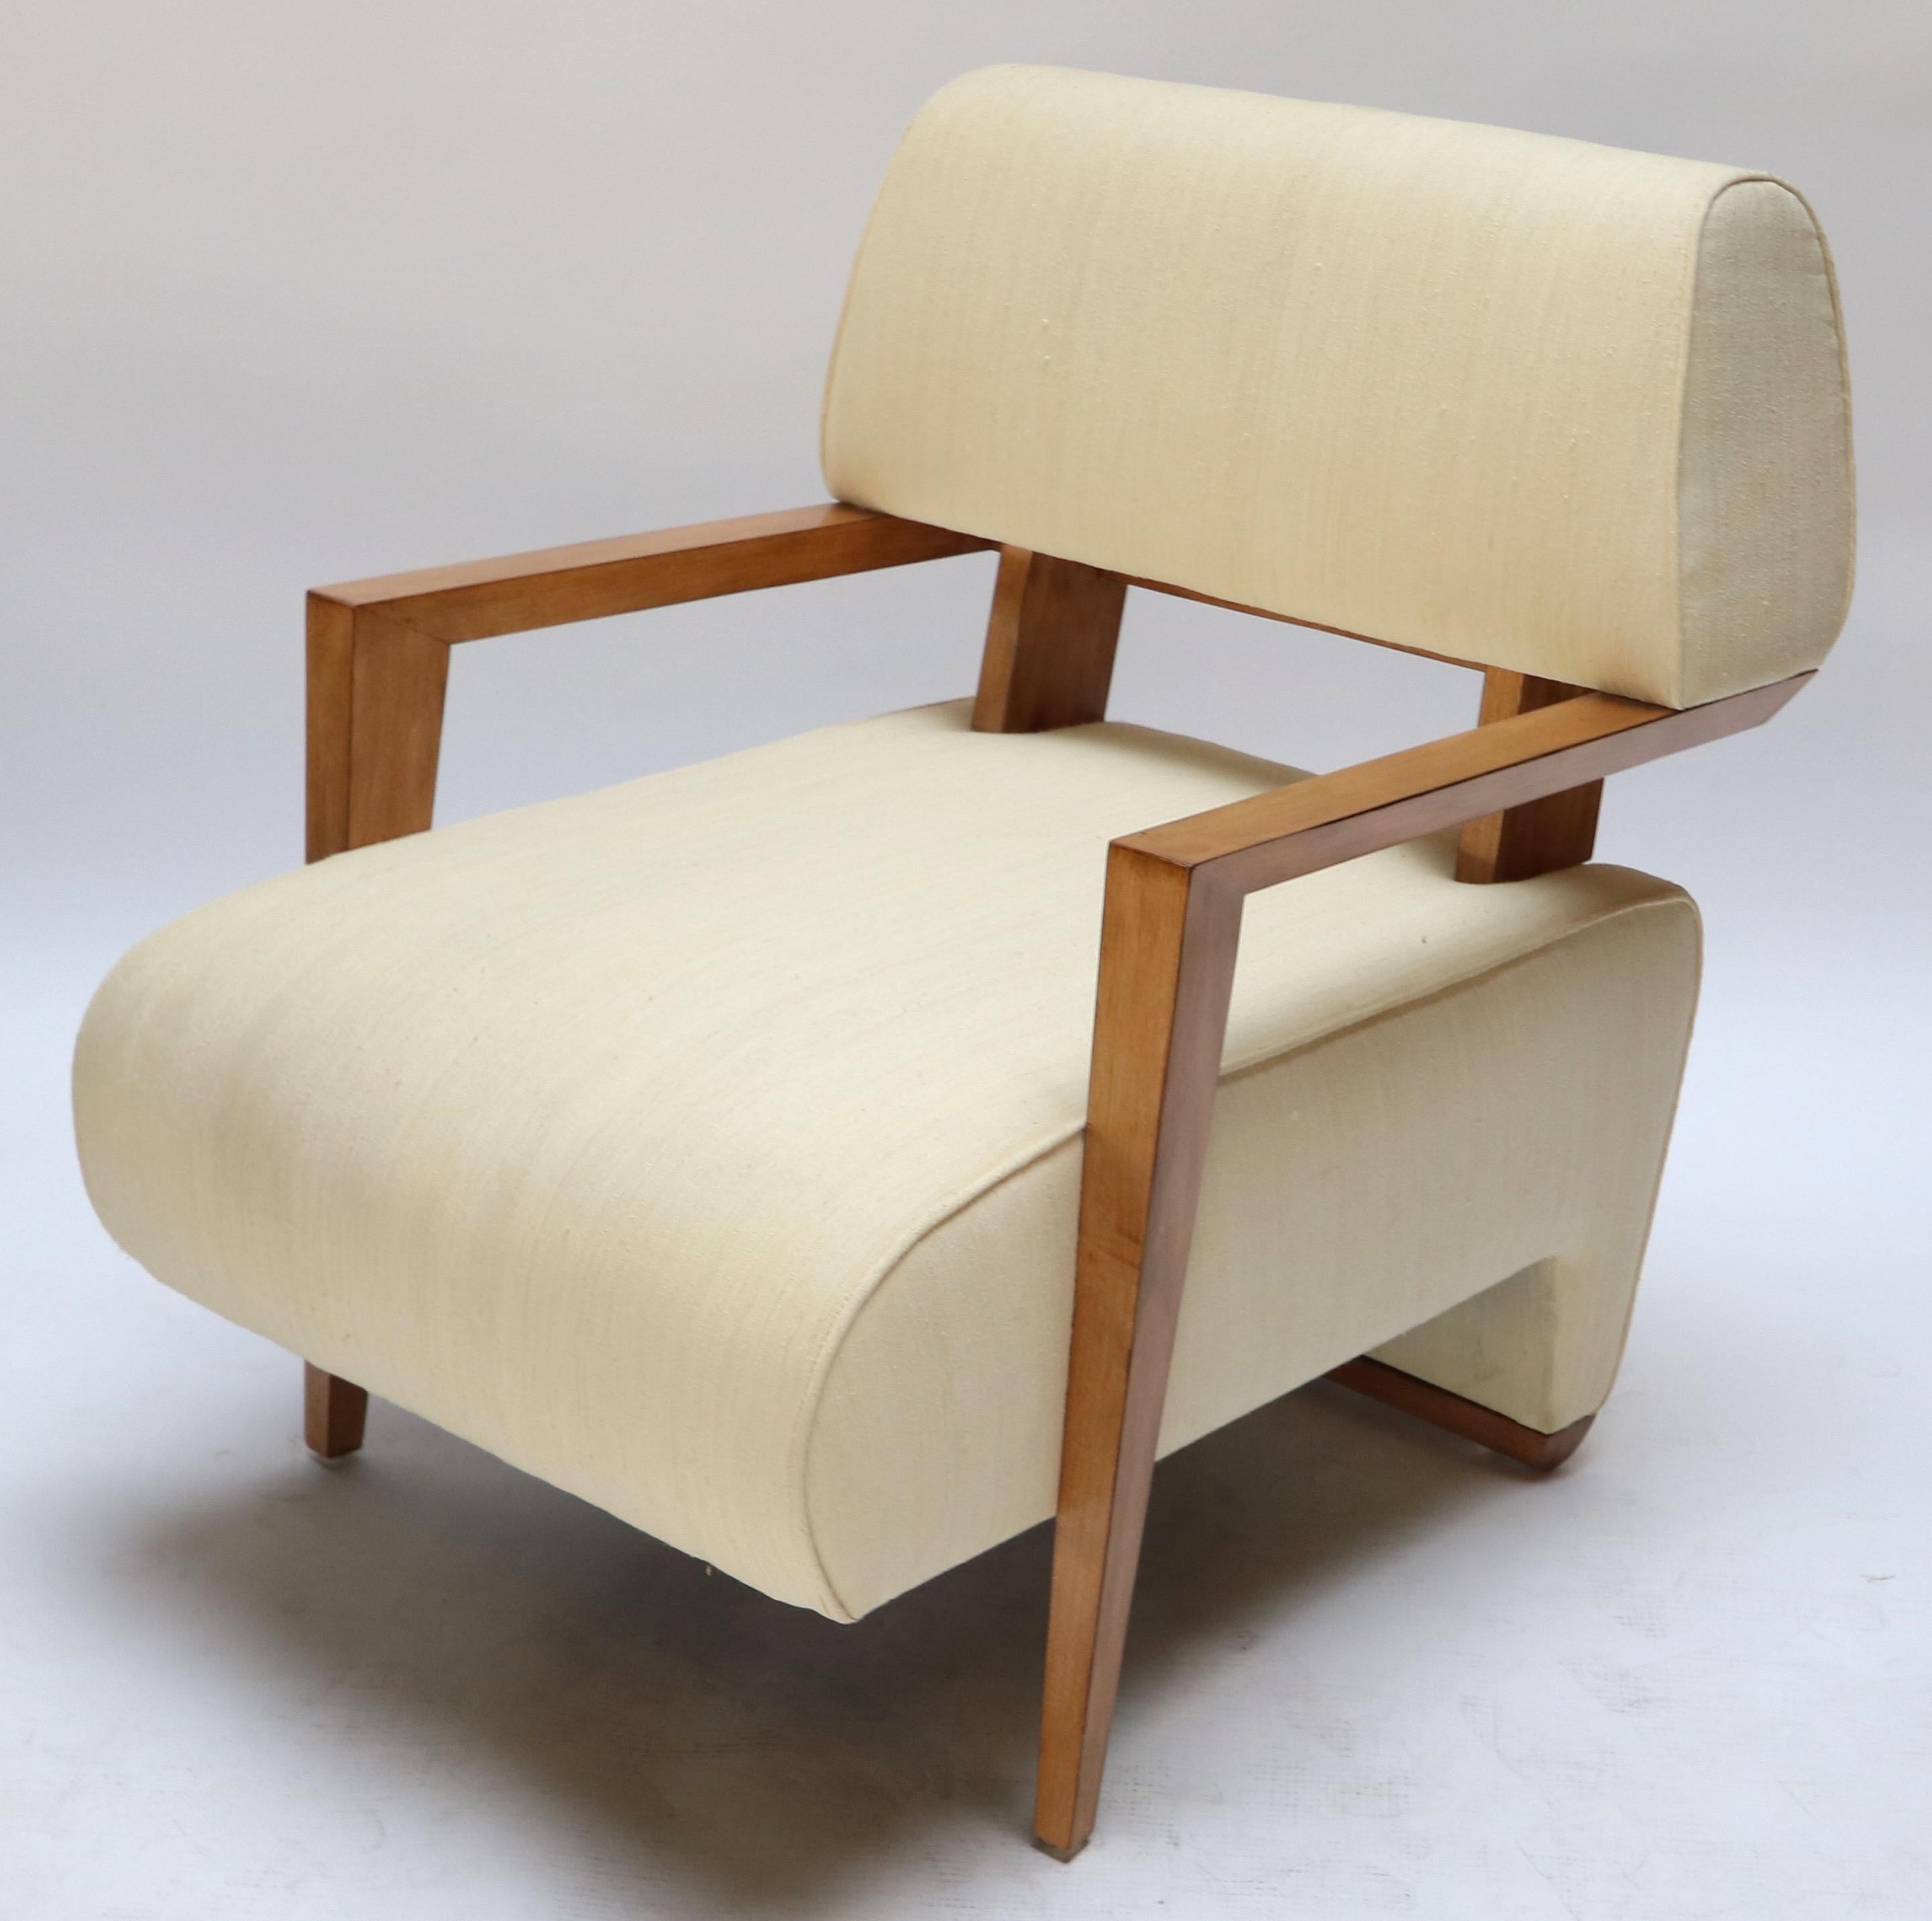 Pair of custom Art Deco midcentury style armchairs upholstered in ivory silk. Made in Los Angeles by Adesso Imports. Can be done in different wood and fabric.